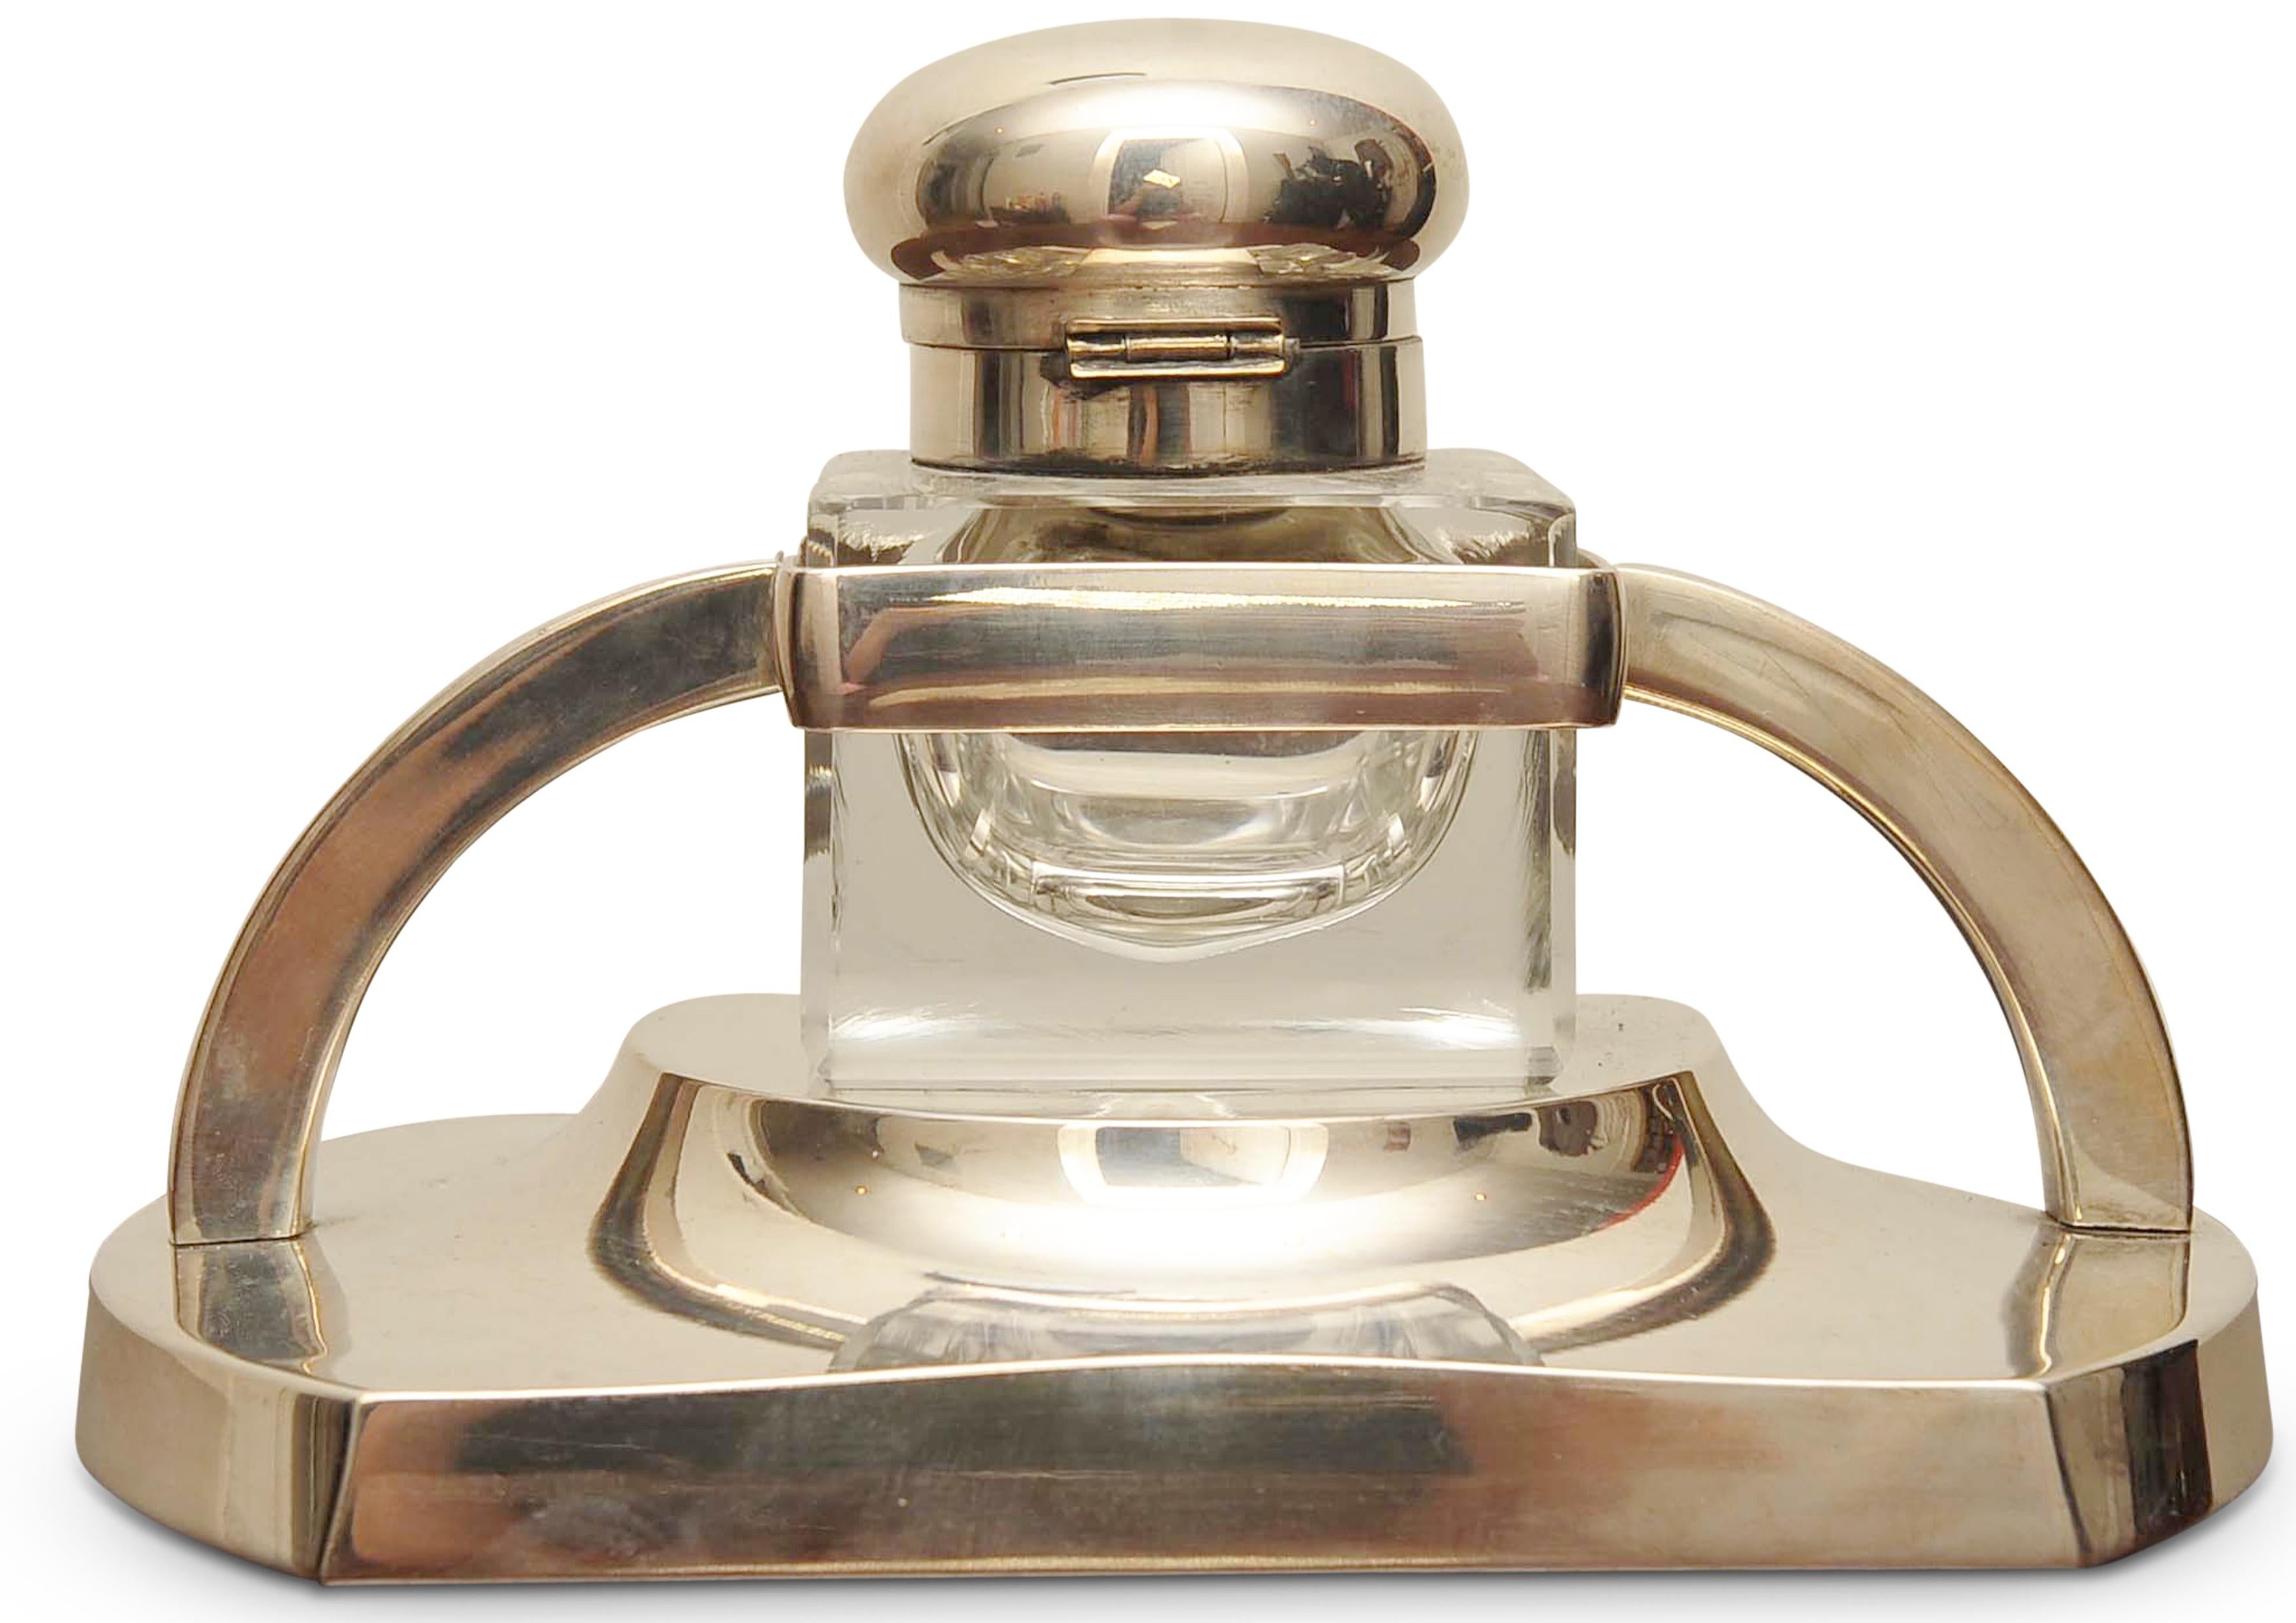 20th Century Art Deco Large Silver Plated Desk Inkwell On Stand Made in Denmark  For Sale